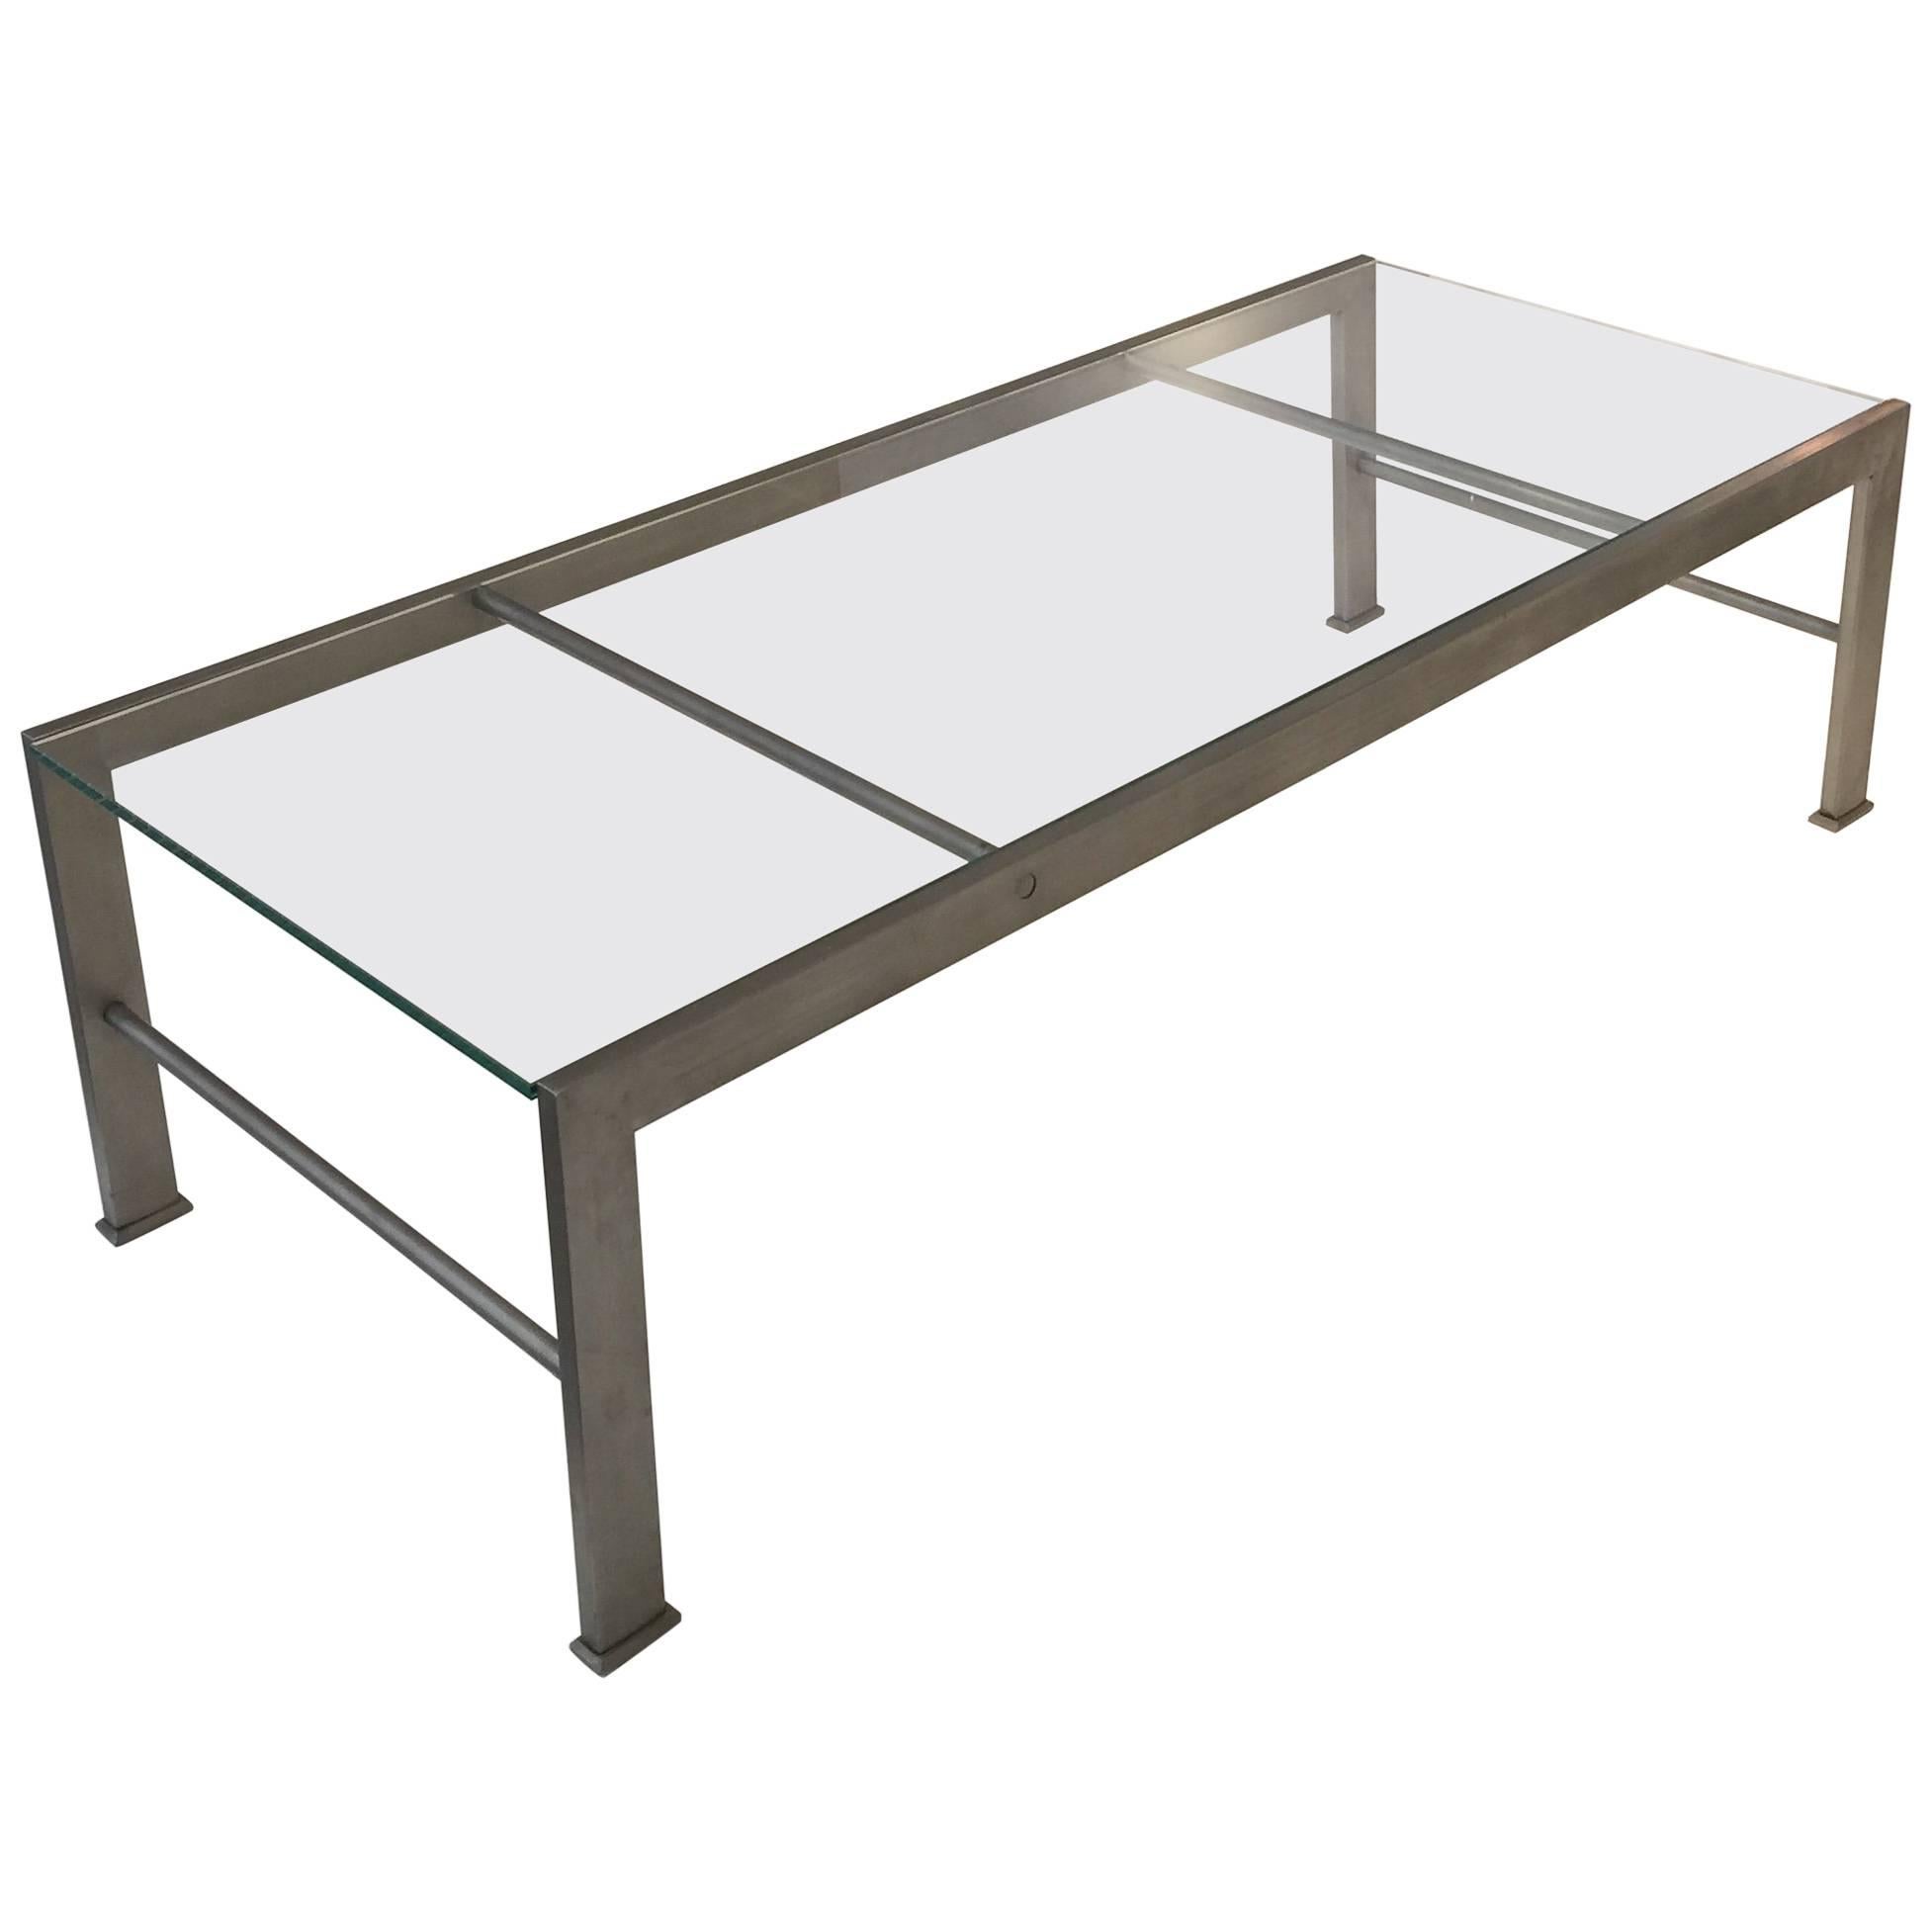 Metal and Glass Coffee Table after a Design by Marc du Plantier For Sale